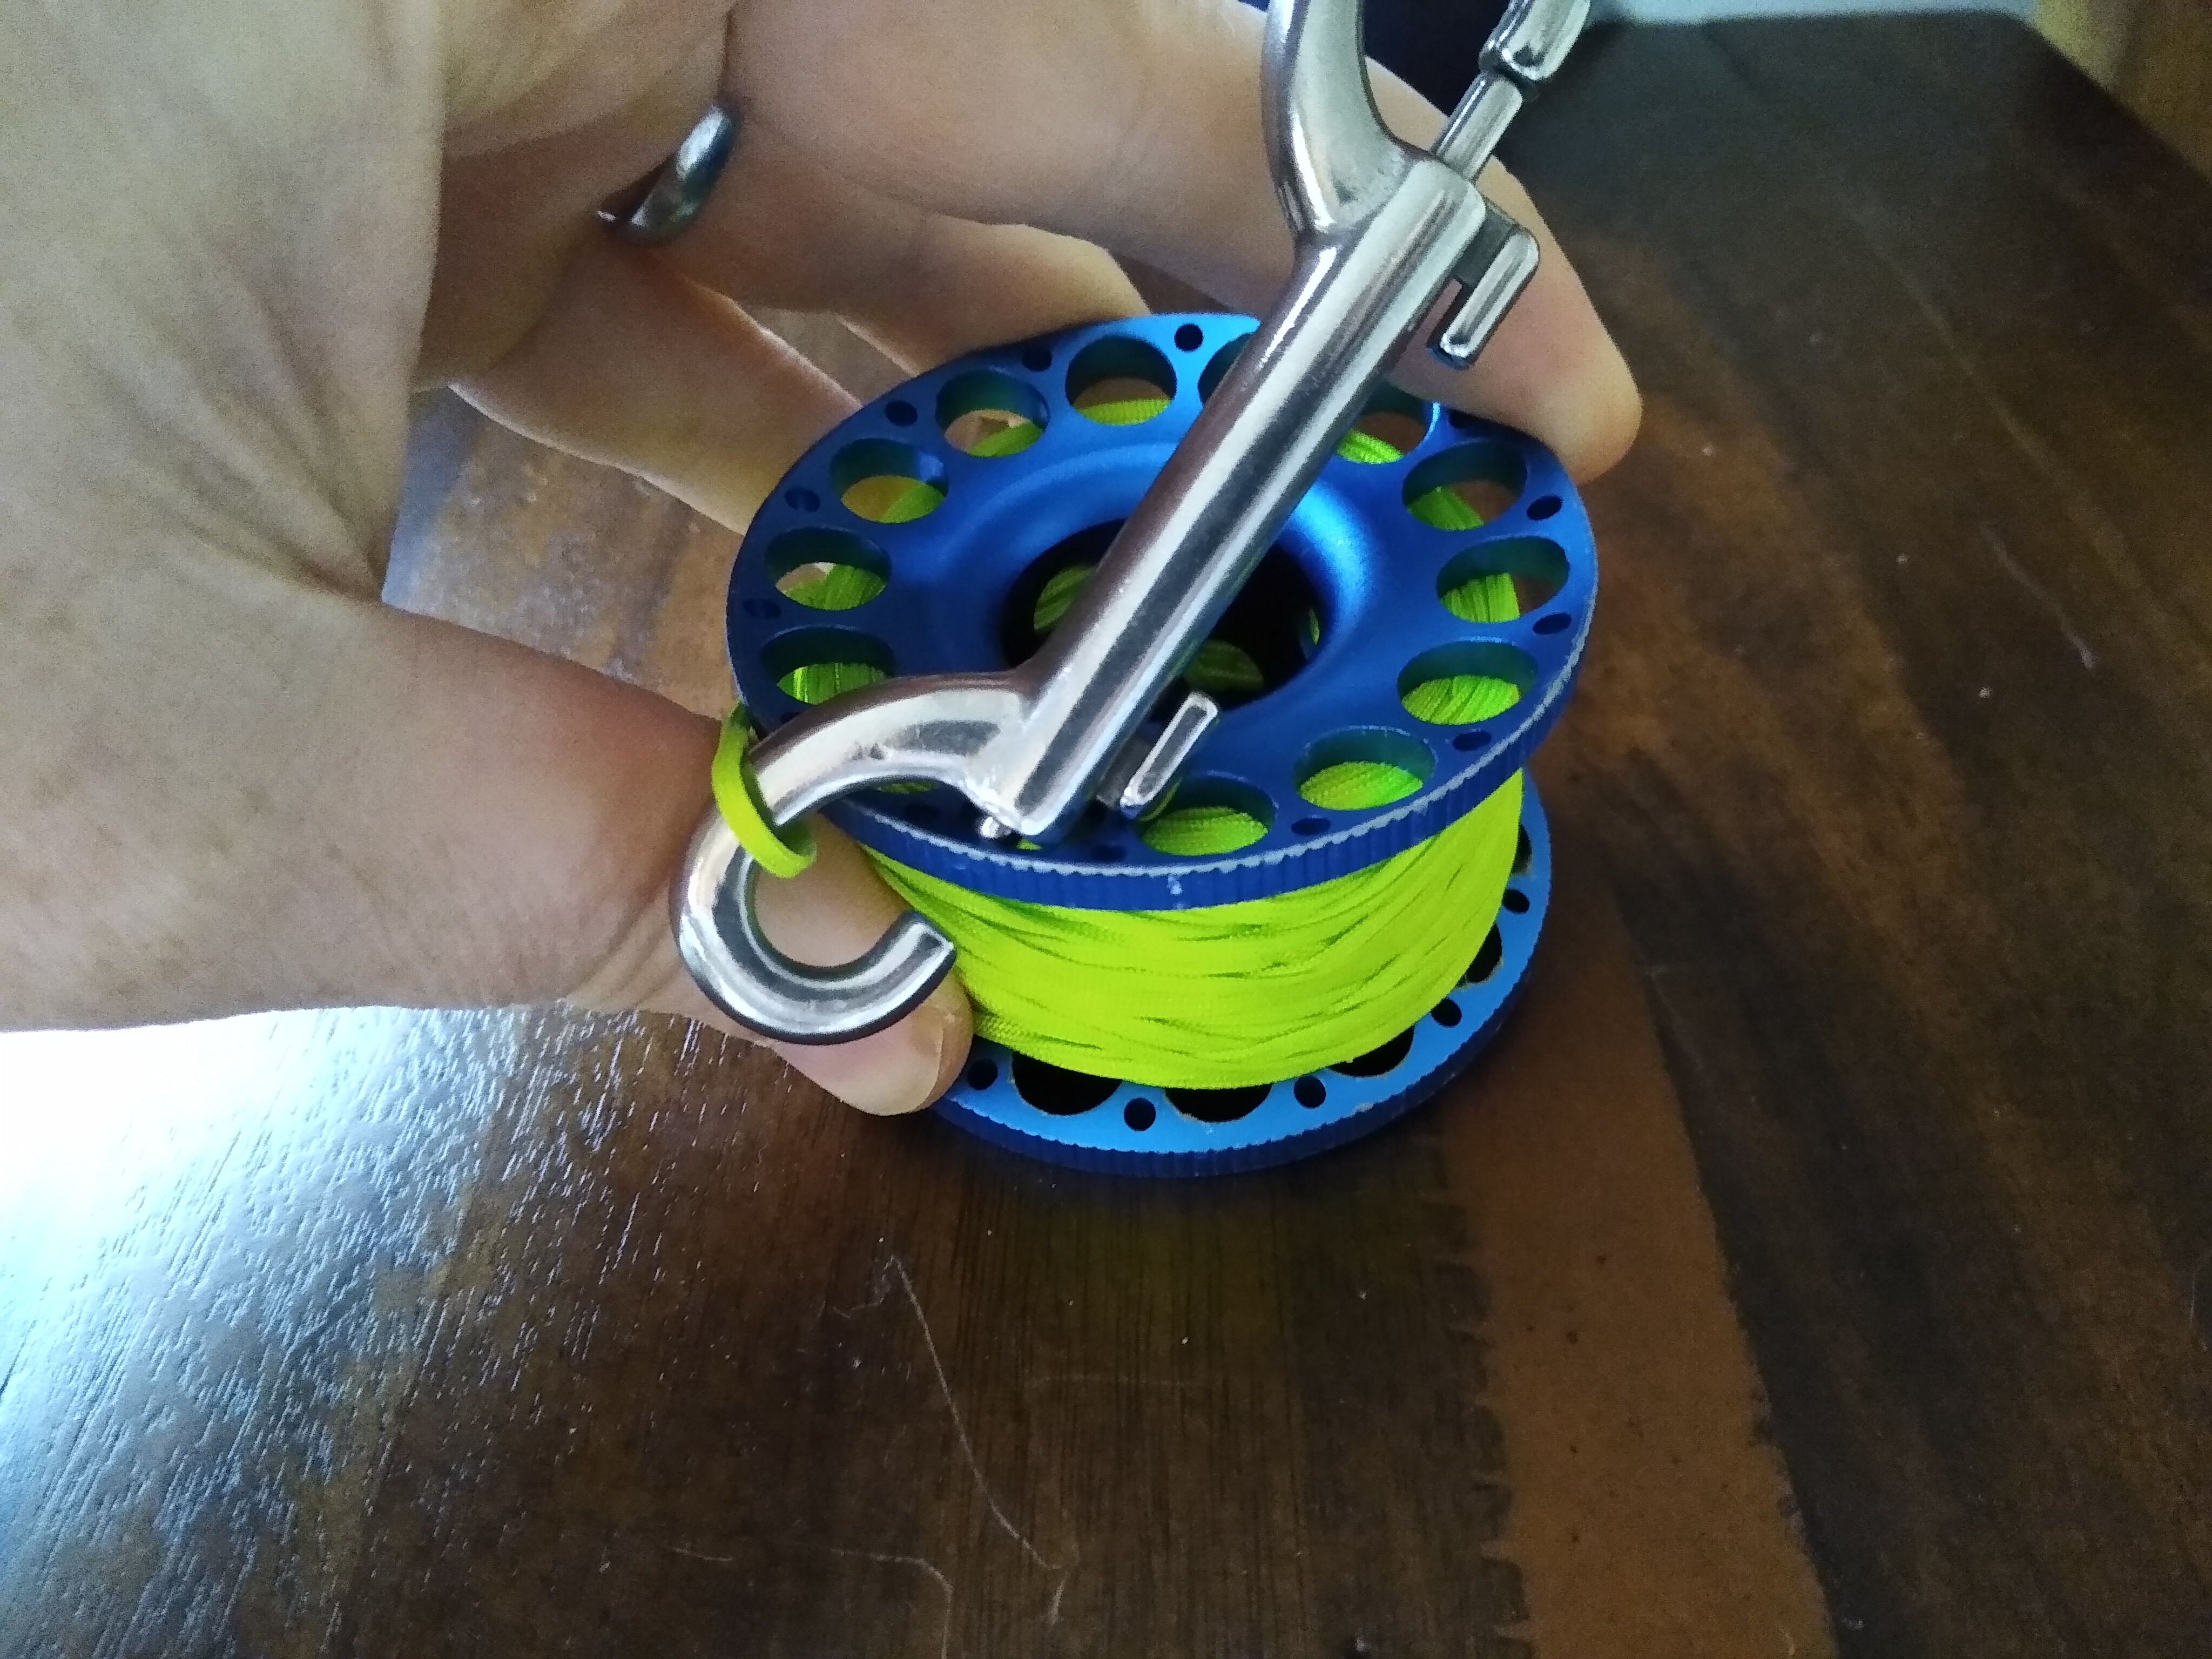 How do you secure your SMB spool?